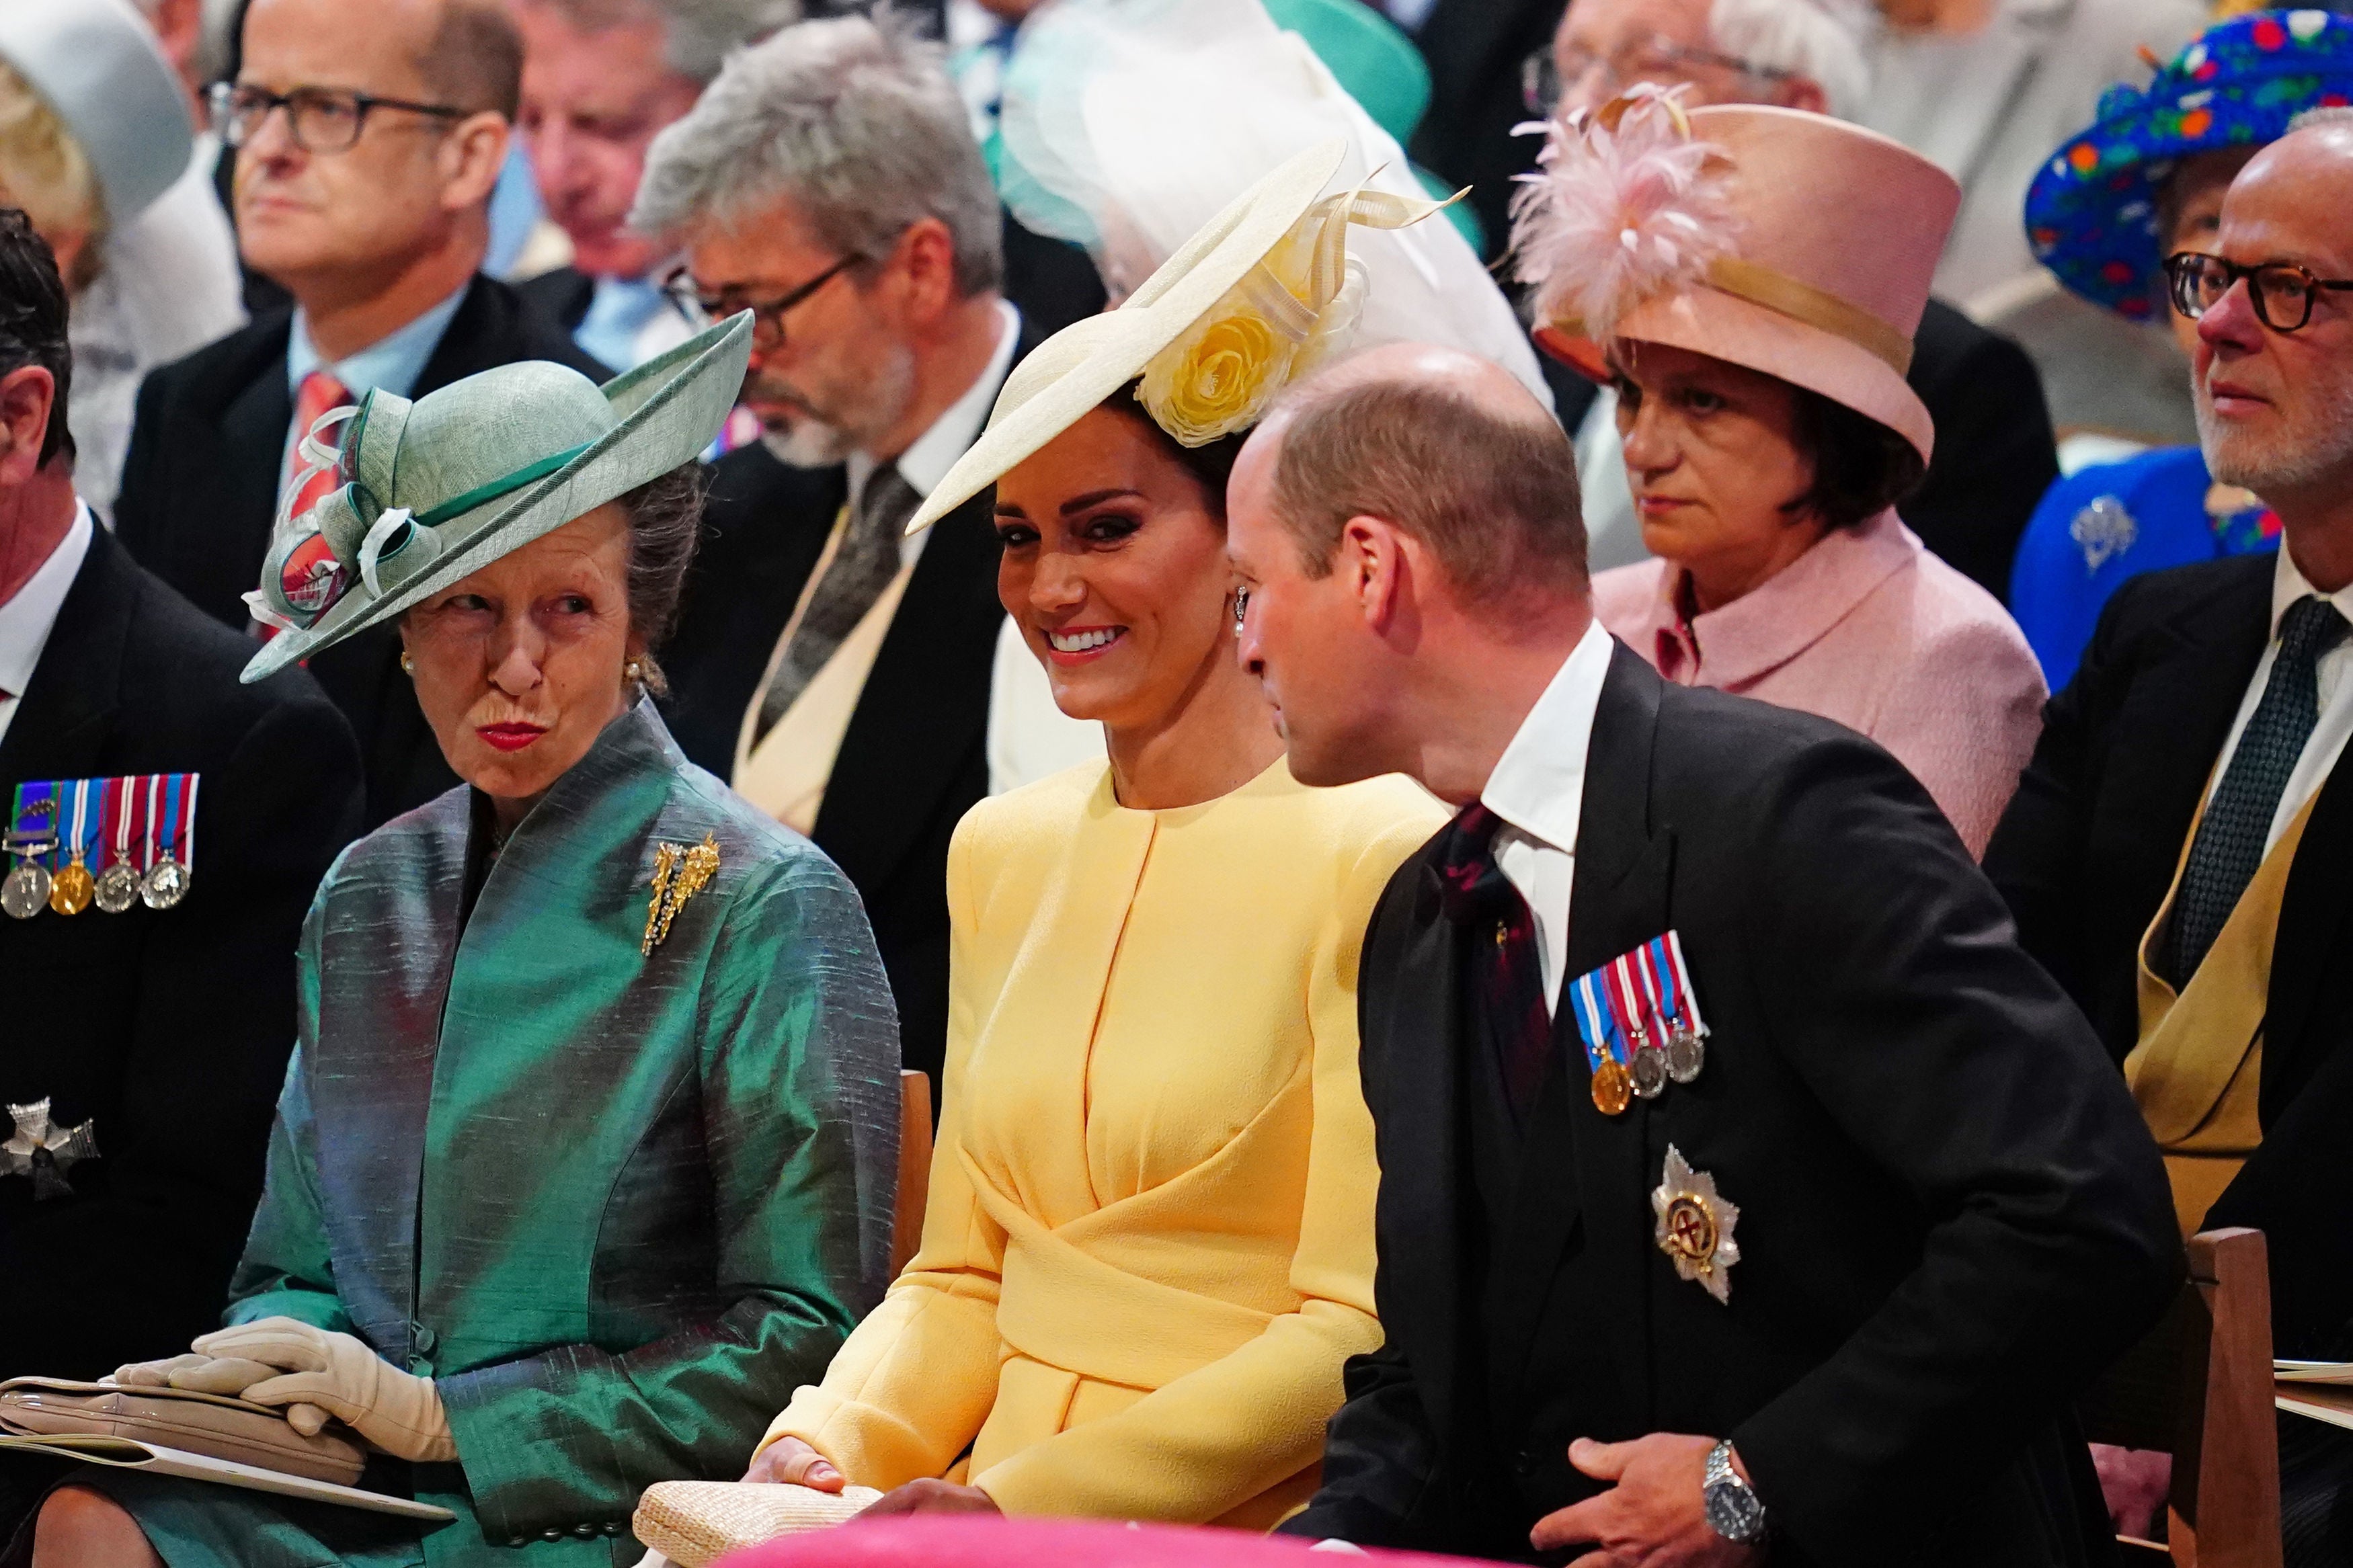 The Princess Royal, the Duchess of Cambridge and the Duke of Cambridge during the service (Victoria Jones/PA)